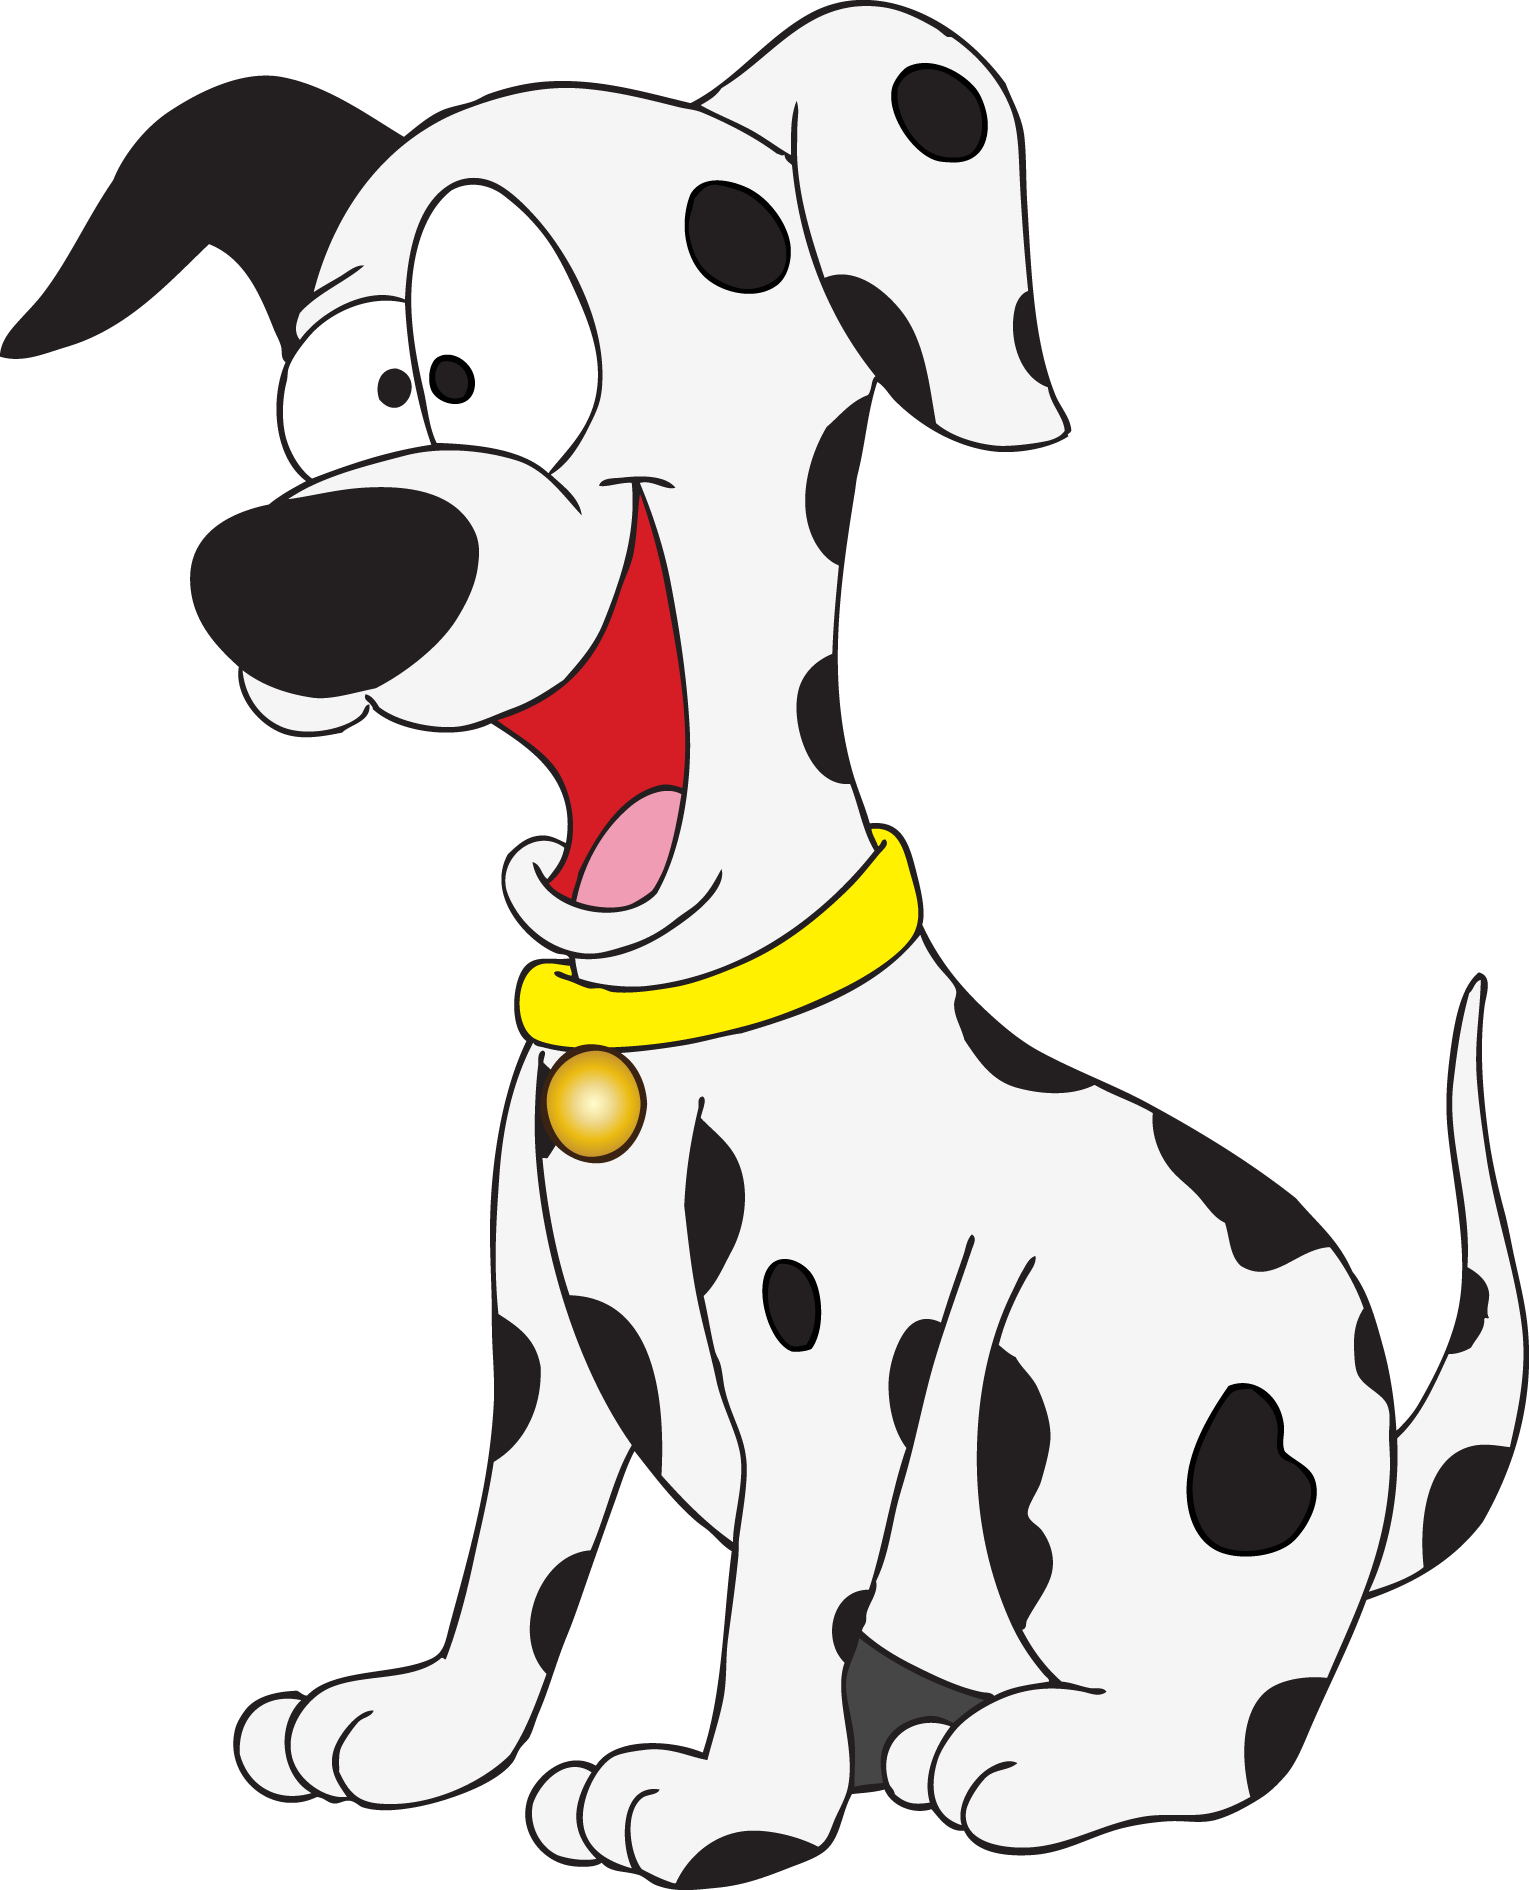 A Cartoon Of A Dog With A Yellow Collar